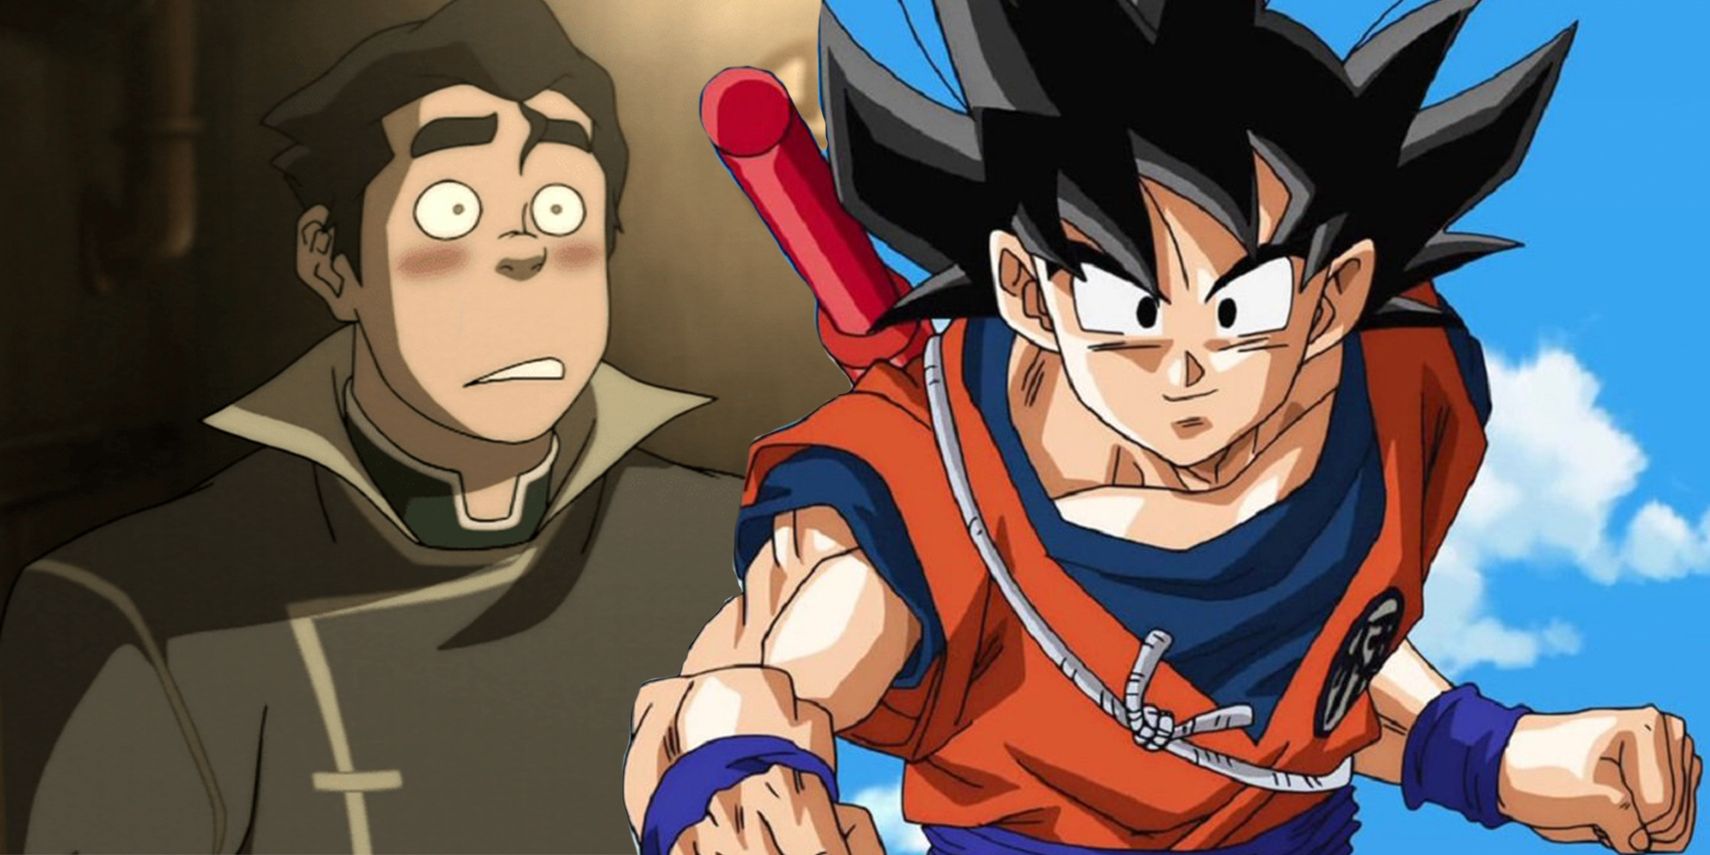 Bolin with shocked expression and Goku in fight stance